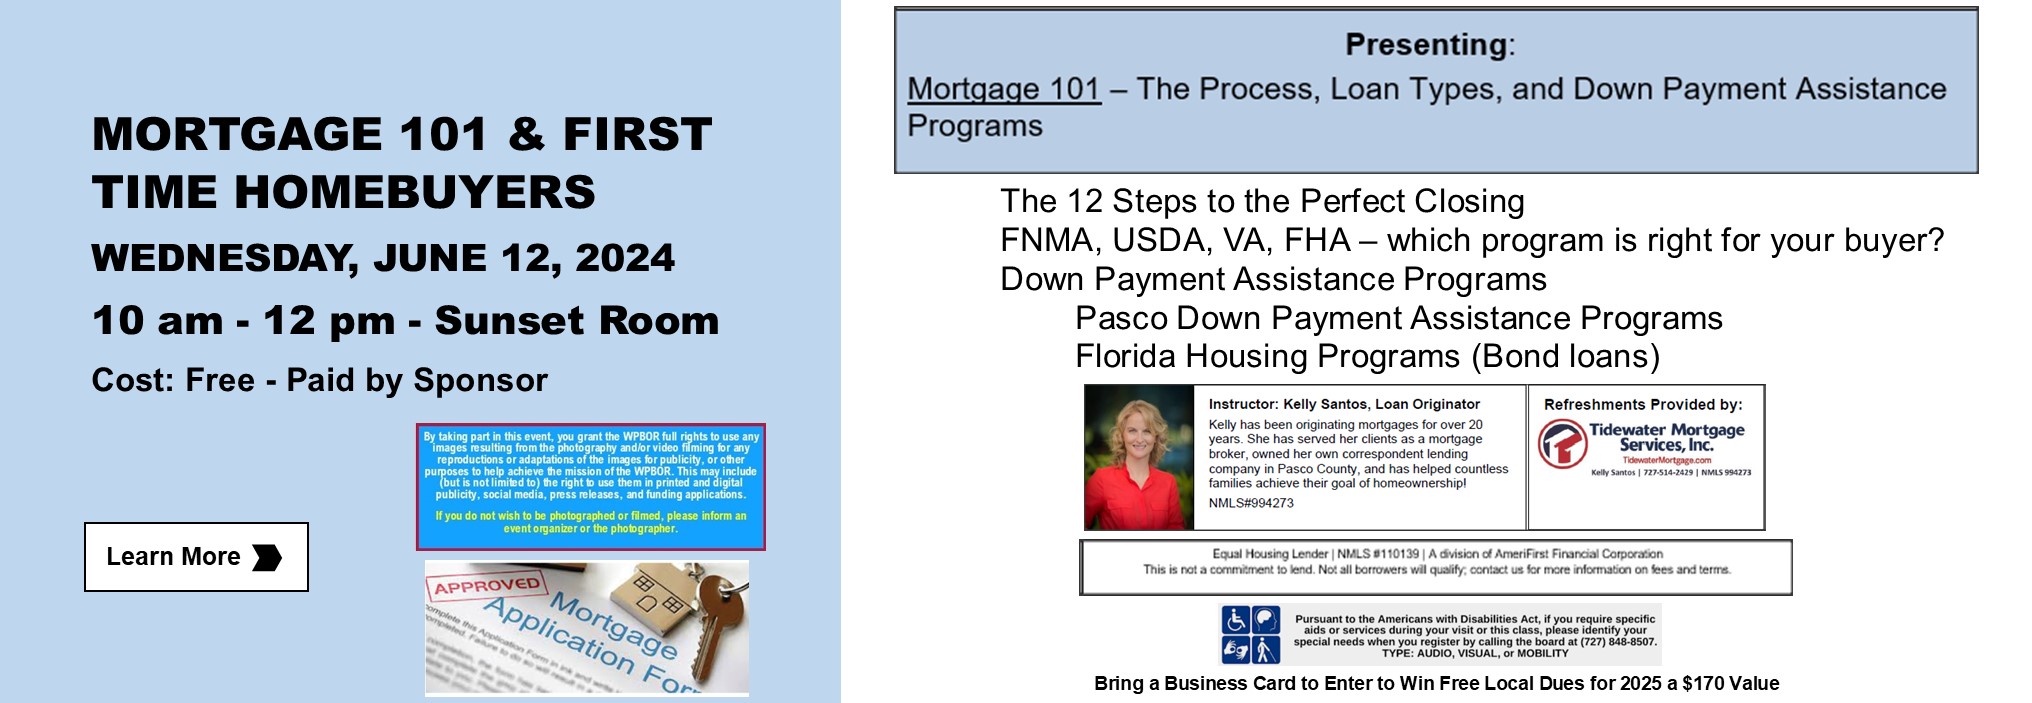 Mortgage 101 & First Time Homebuyers Class Description